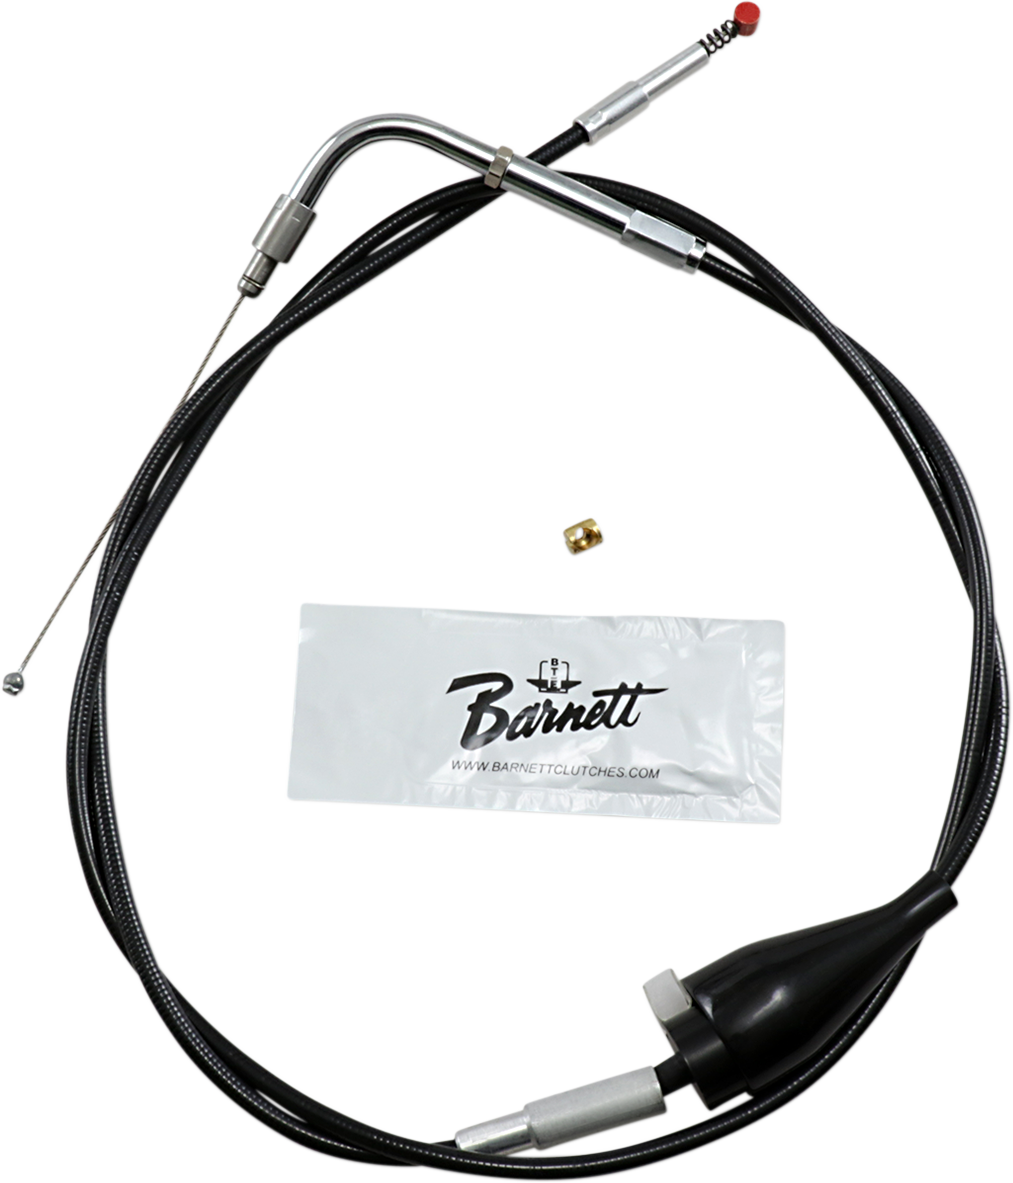 DS-223478 - BARNETT Idle Cable - Cruise - +6" - Black 101-30-41002-06